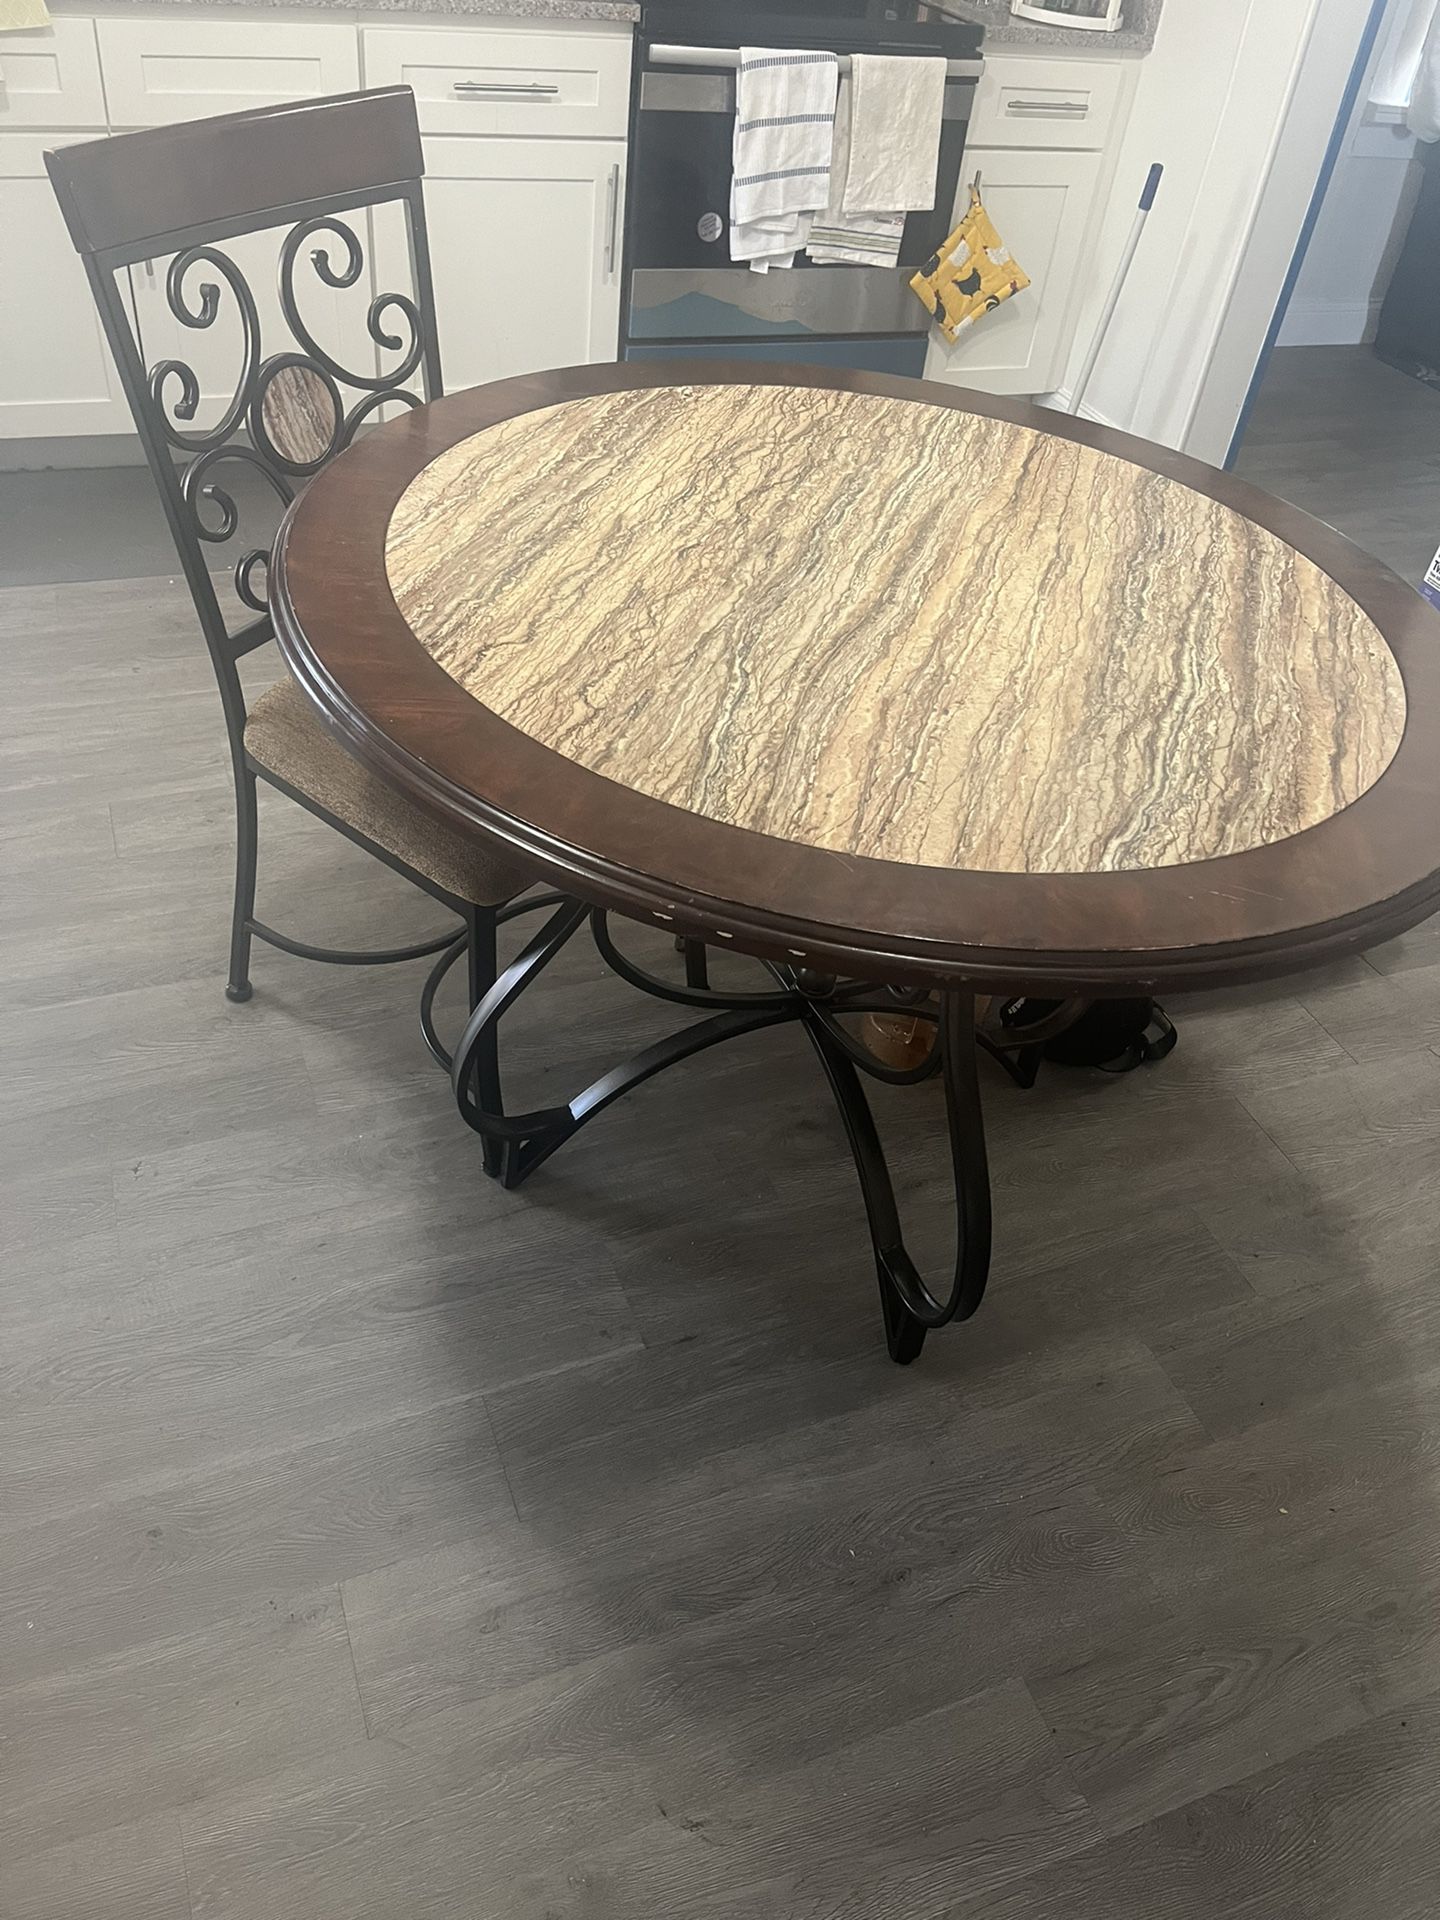 Round kitchen patio table 40” w 4 matching chairs $99